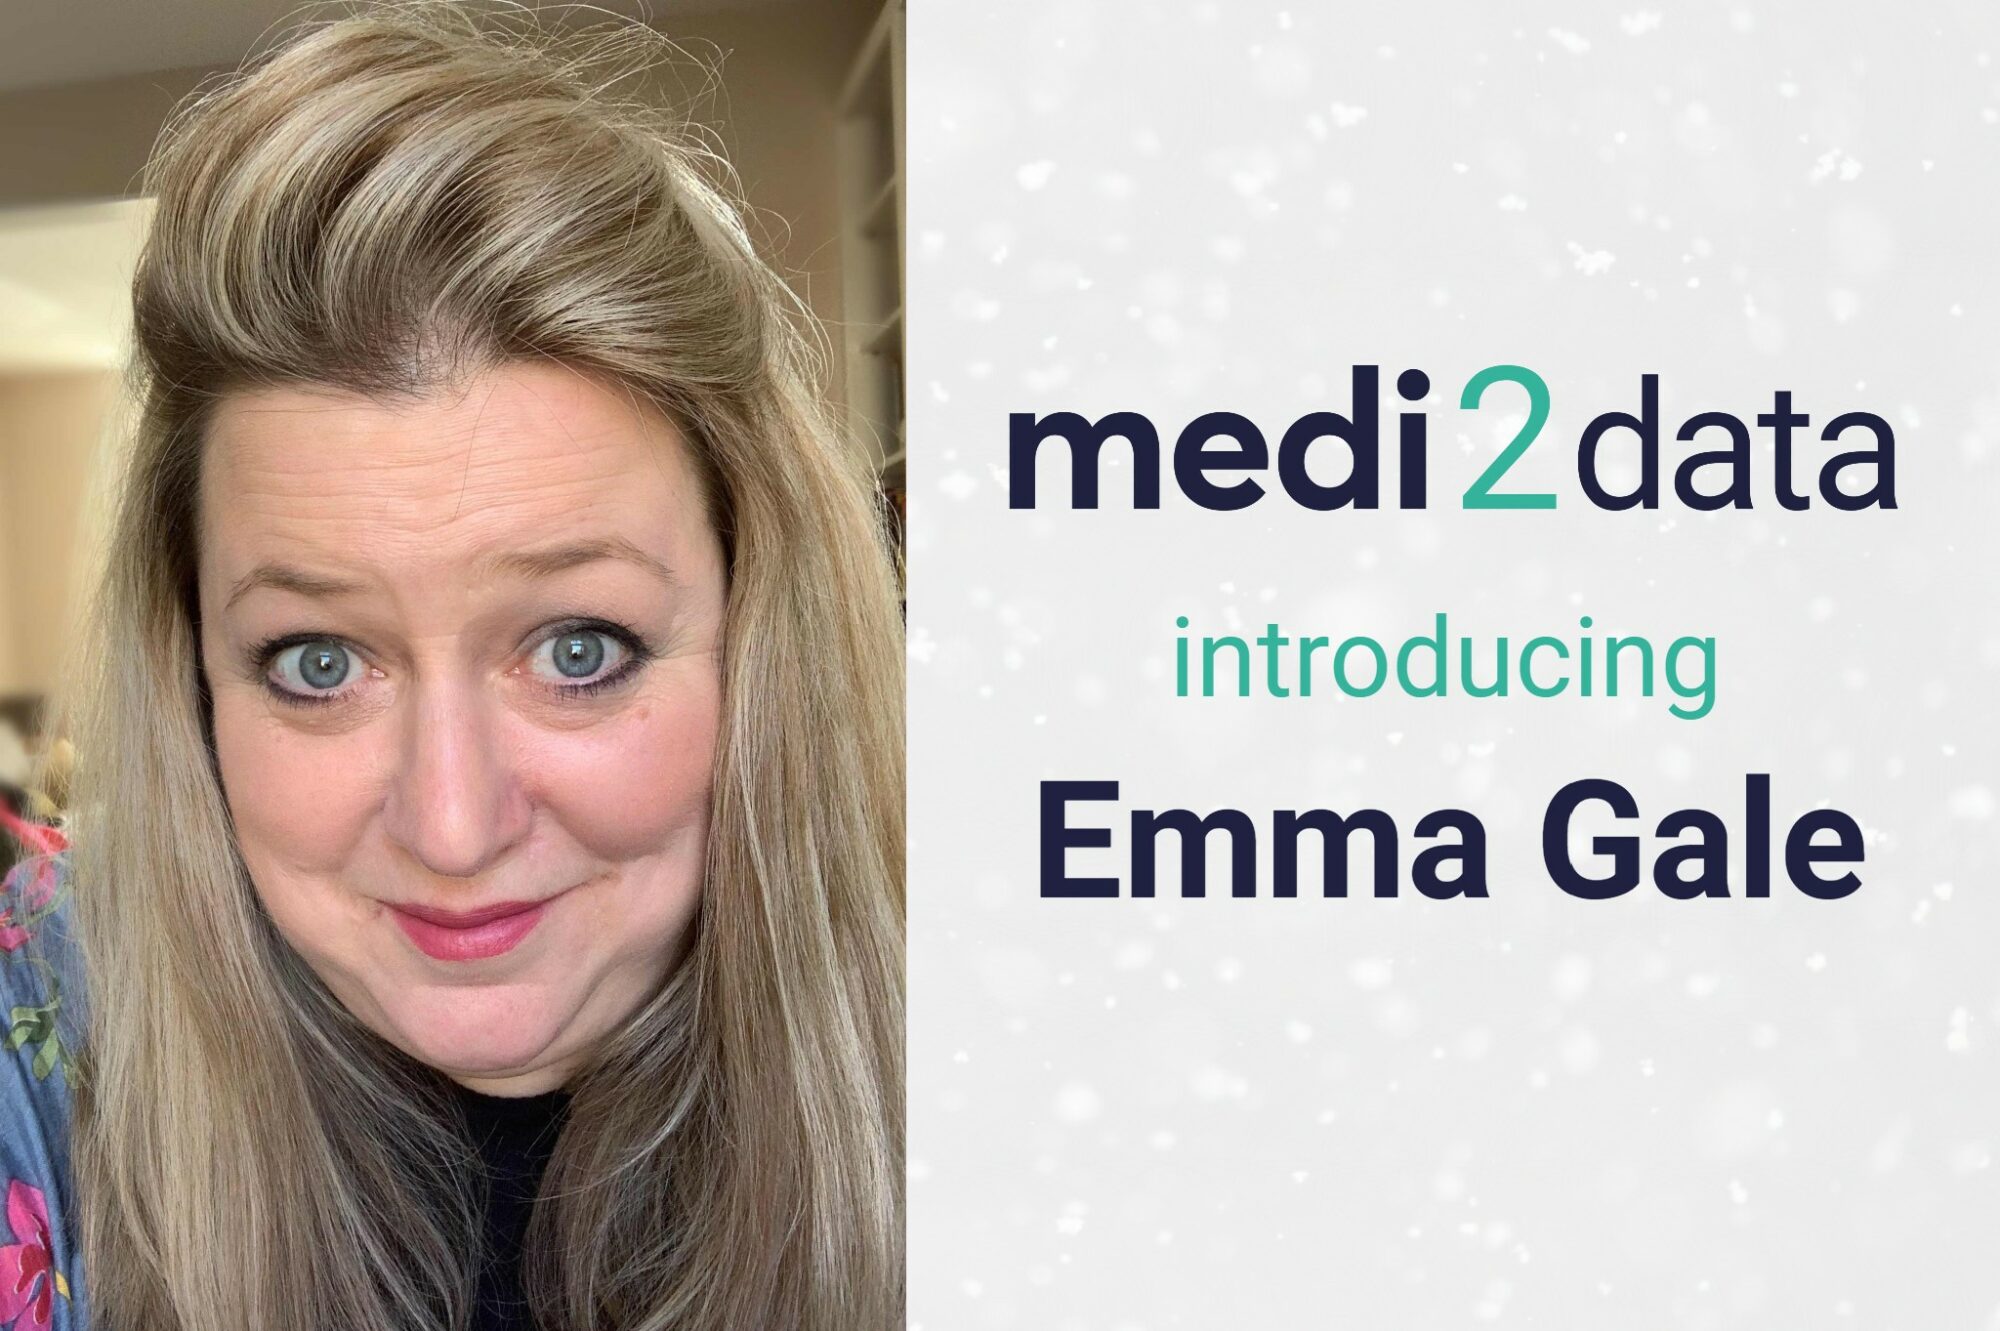 Medi2data expands its senior team with a technical project manager appointment